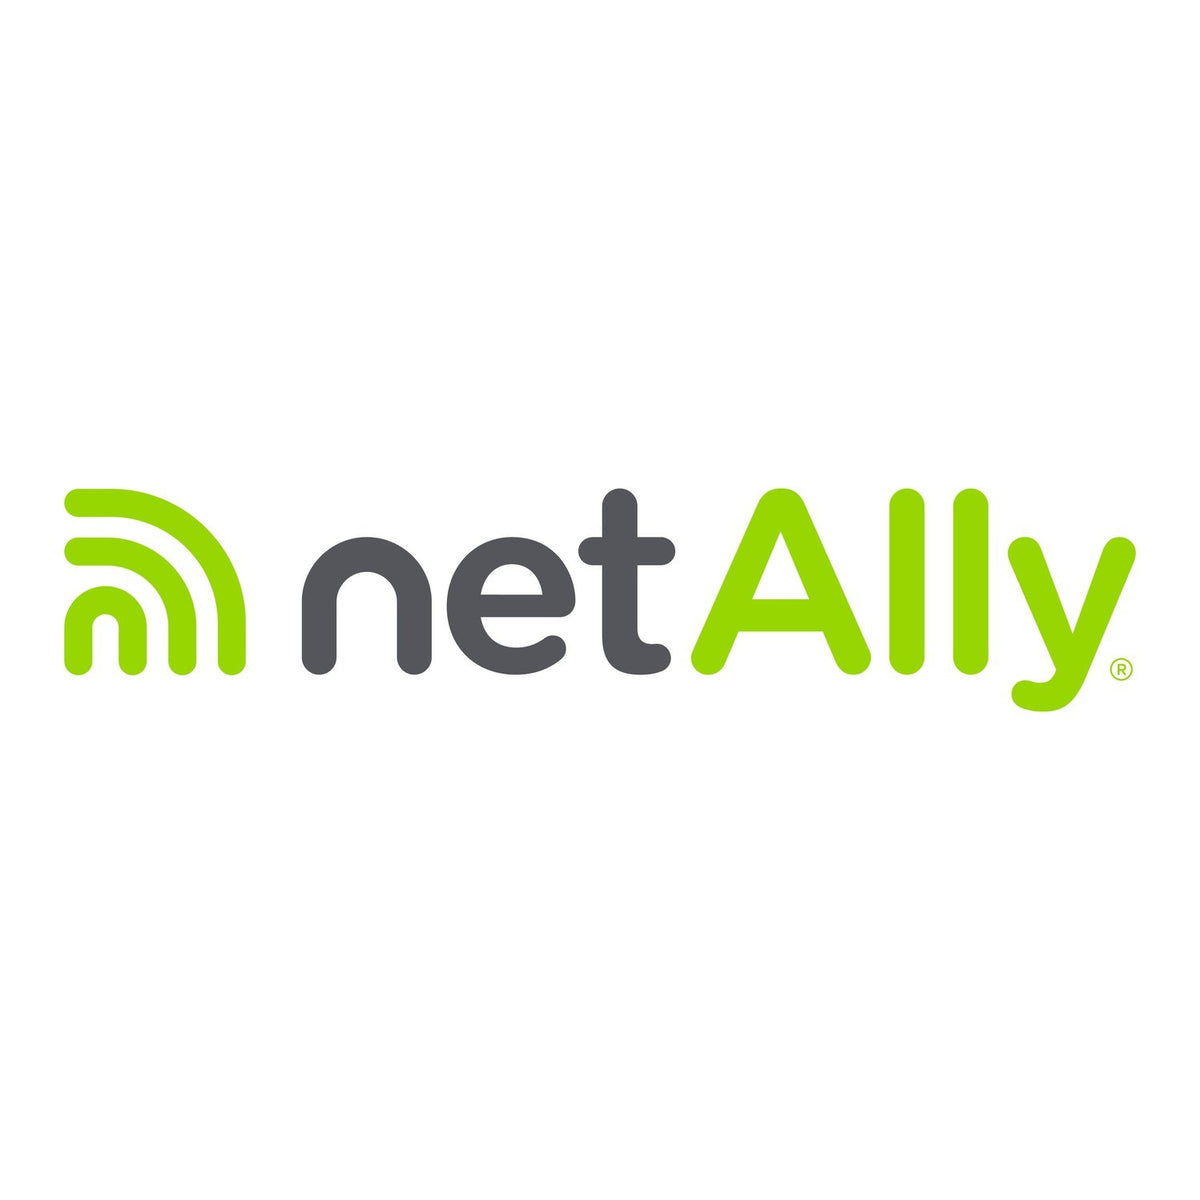 NetAlly Link-Live Private Edition, software download. Requires annual subscription LL-PRVT-SUB TEST NetAlly Ie0fa504a19214dc55e7dd710265c9dfbec586942